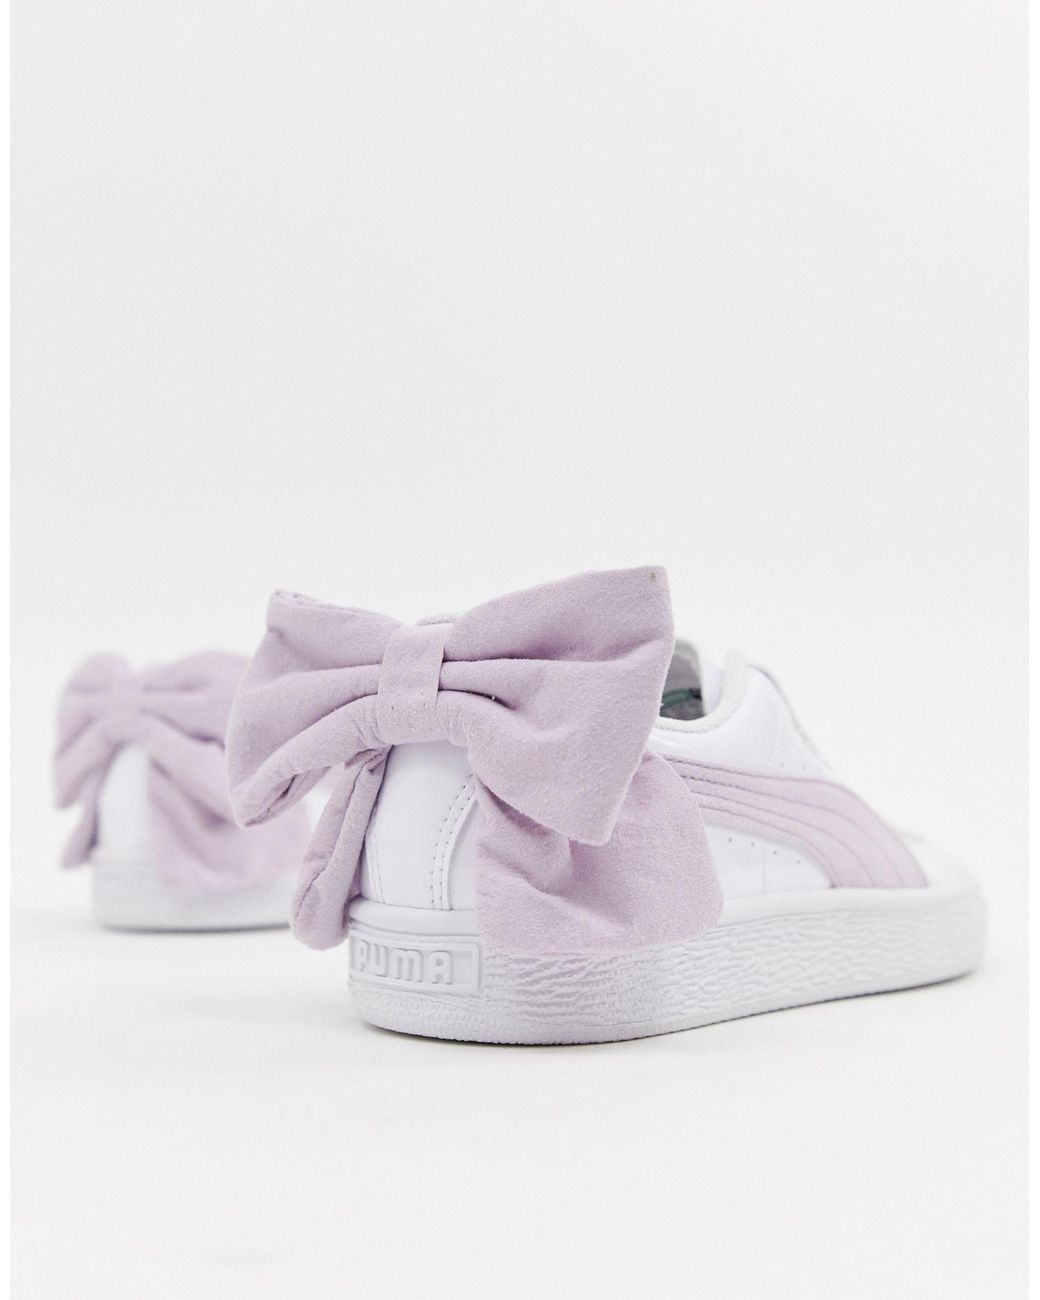 PUMA Suede Basket Bow White Trainers in Pink | Lyst